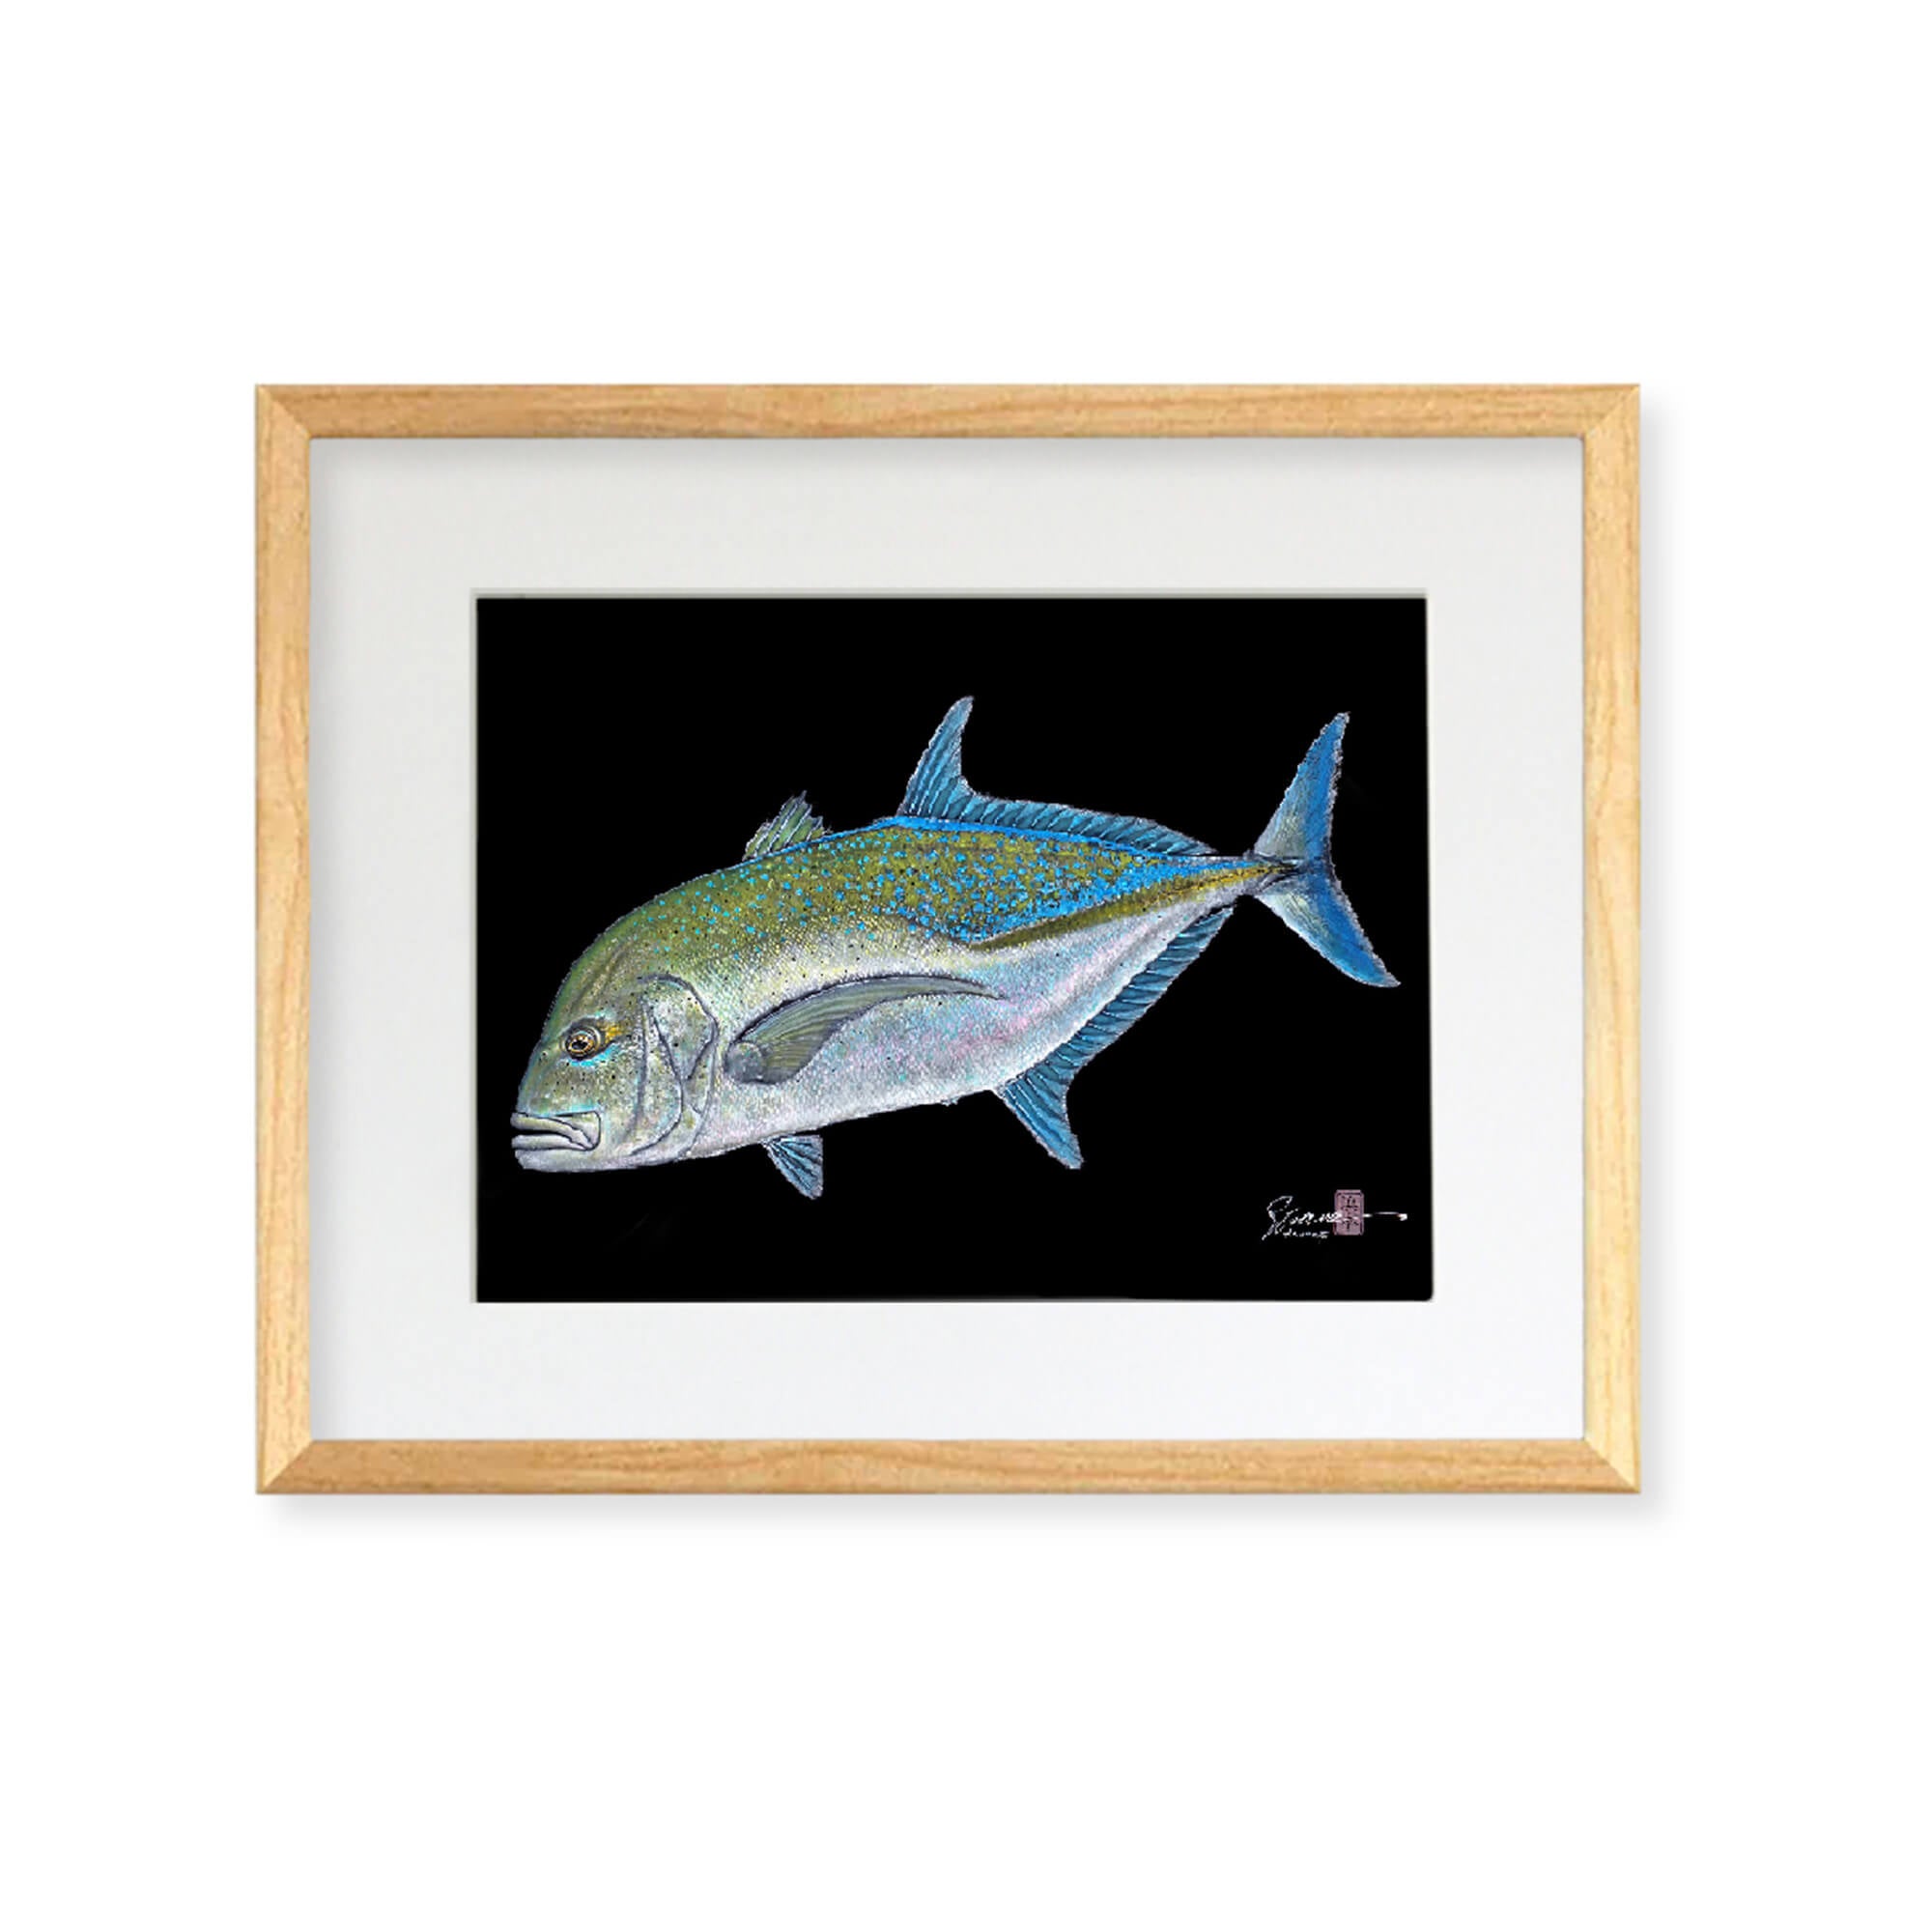 Framed matted print of Omilu (also known as Bluefin Trevally) by Hawaii gyotaku artist Shane Hamamoto